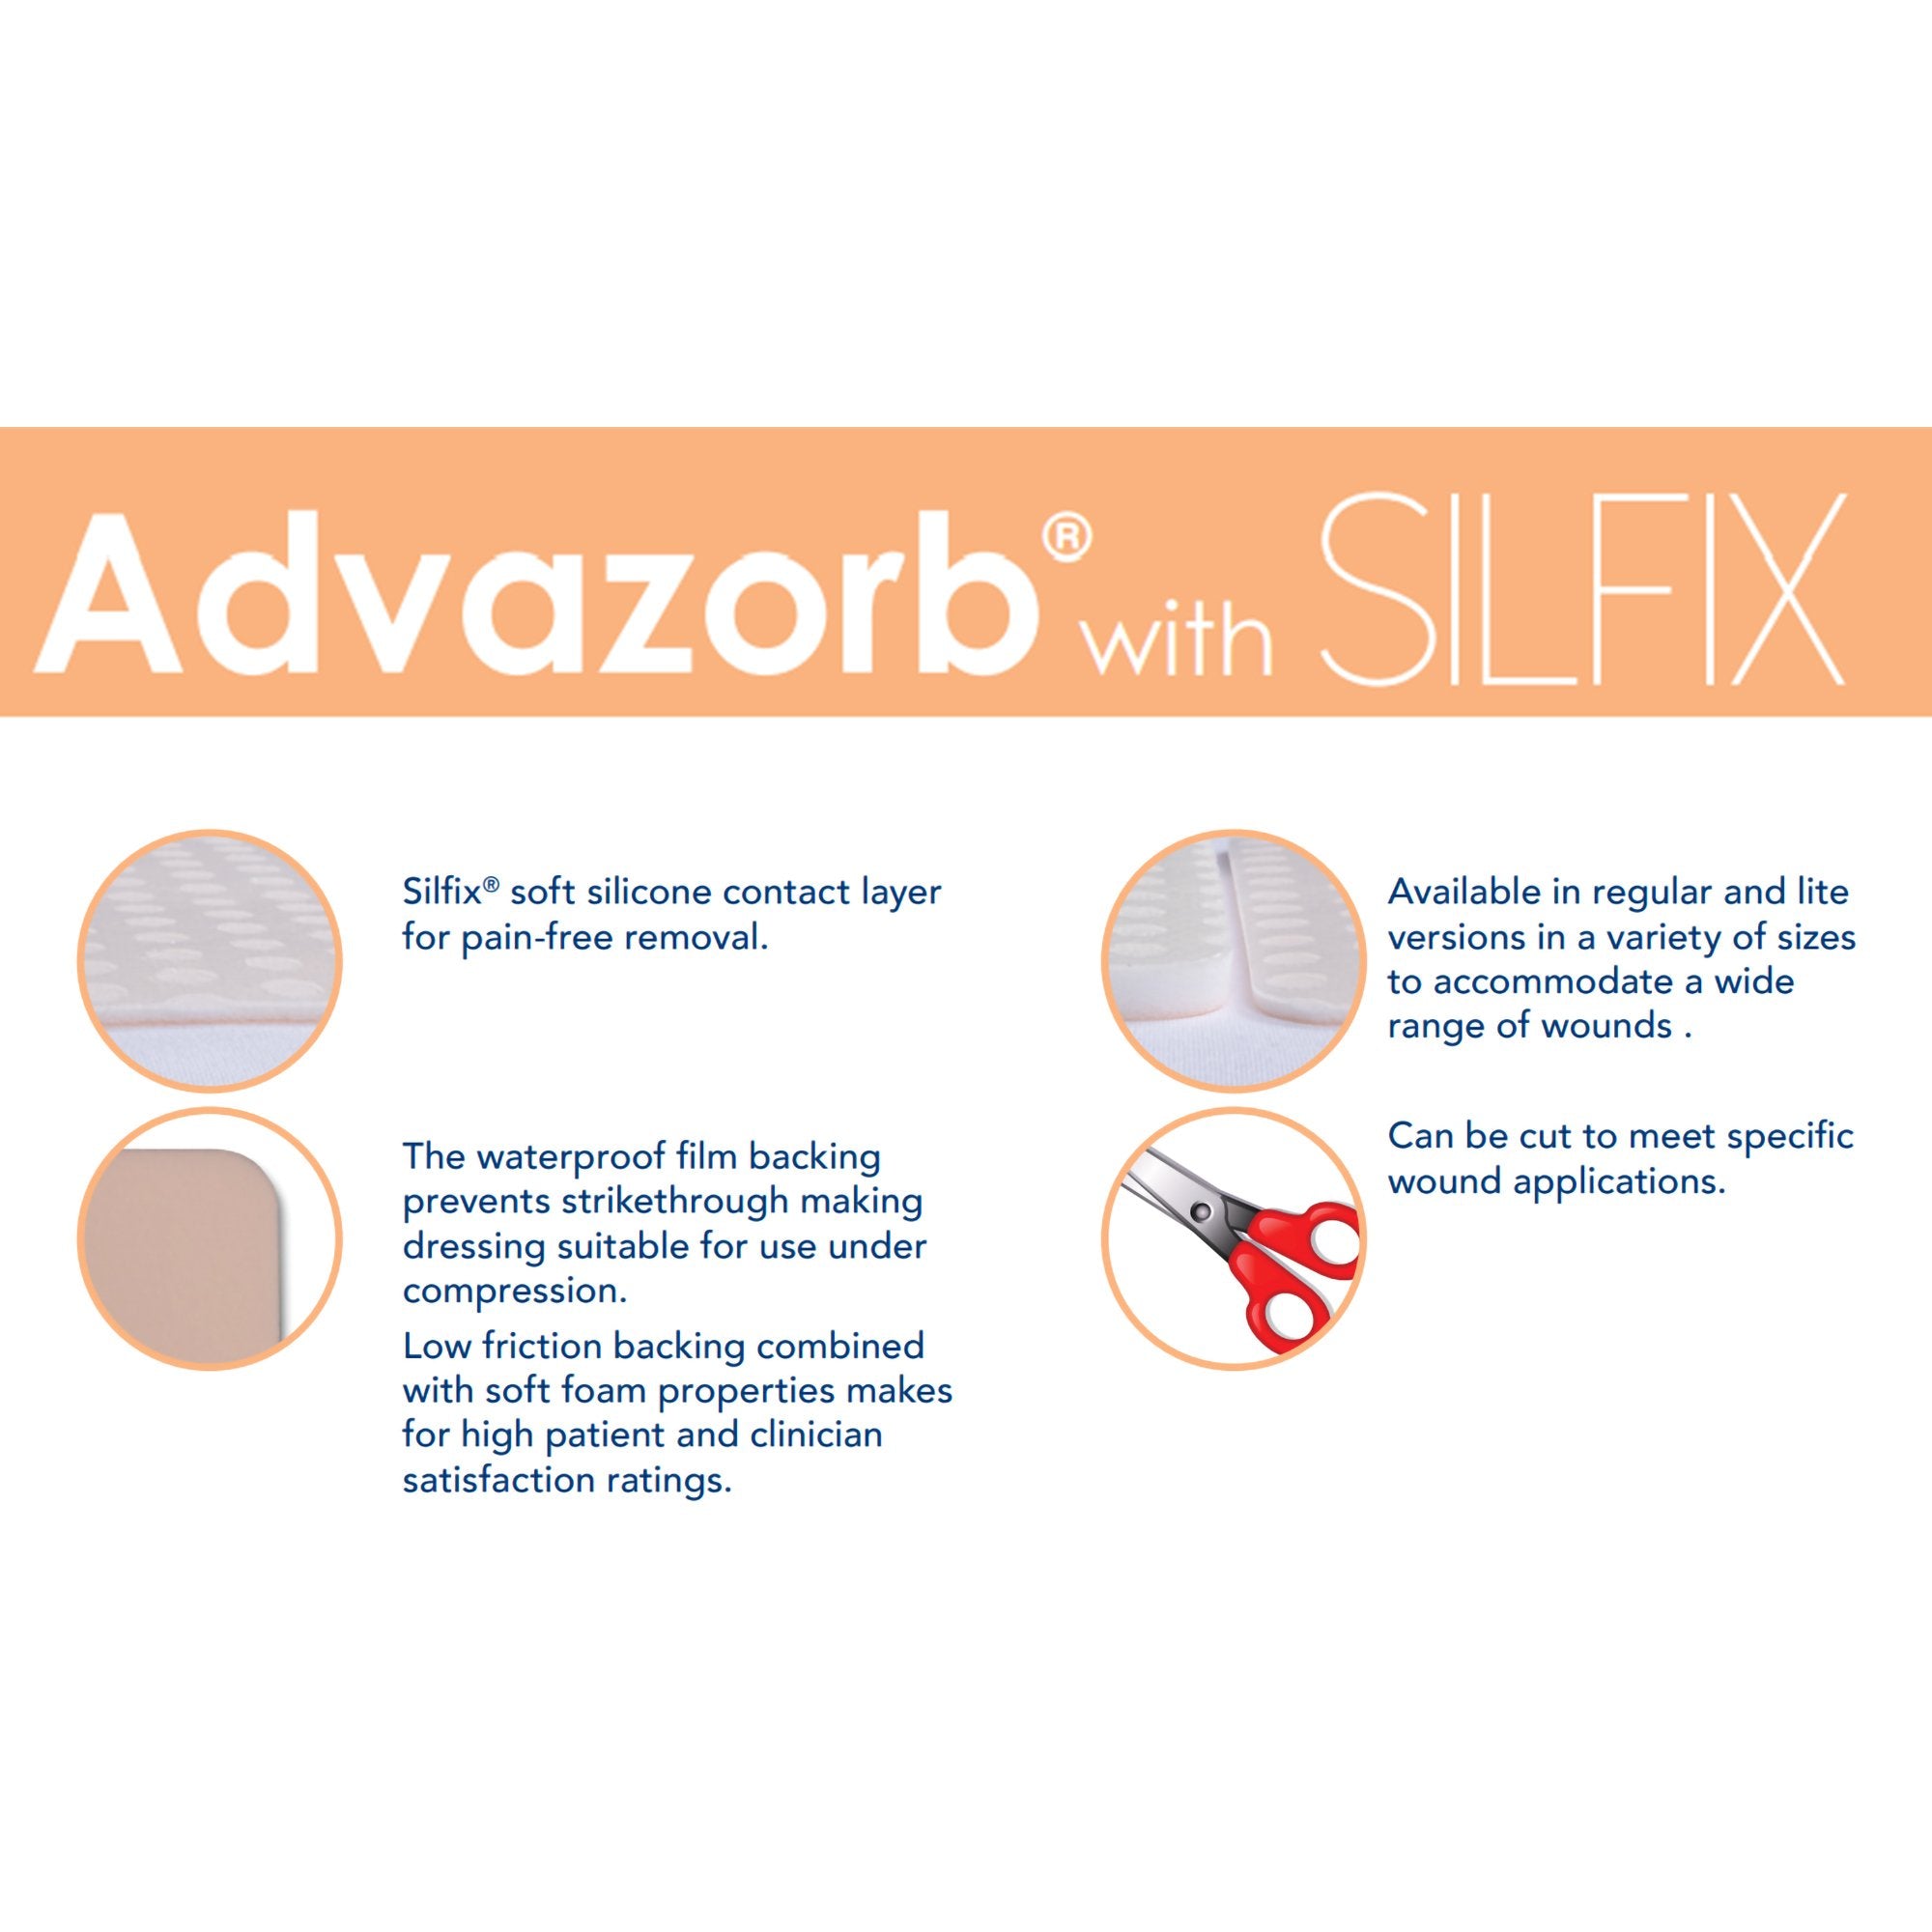 Foam Dressing Advazorb Silfix® 4 X 4 Inch Without Border Film Backing Silicone Face Square Sterile